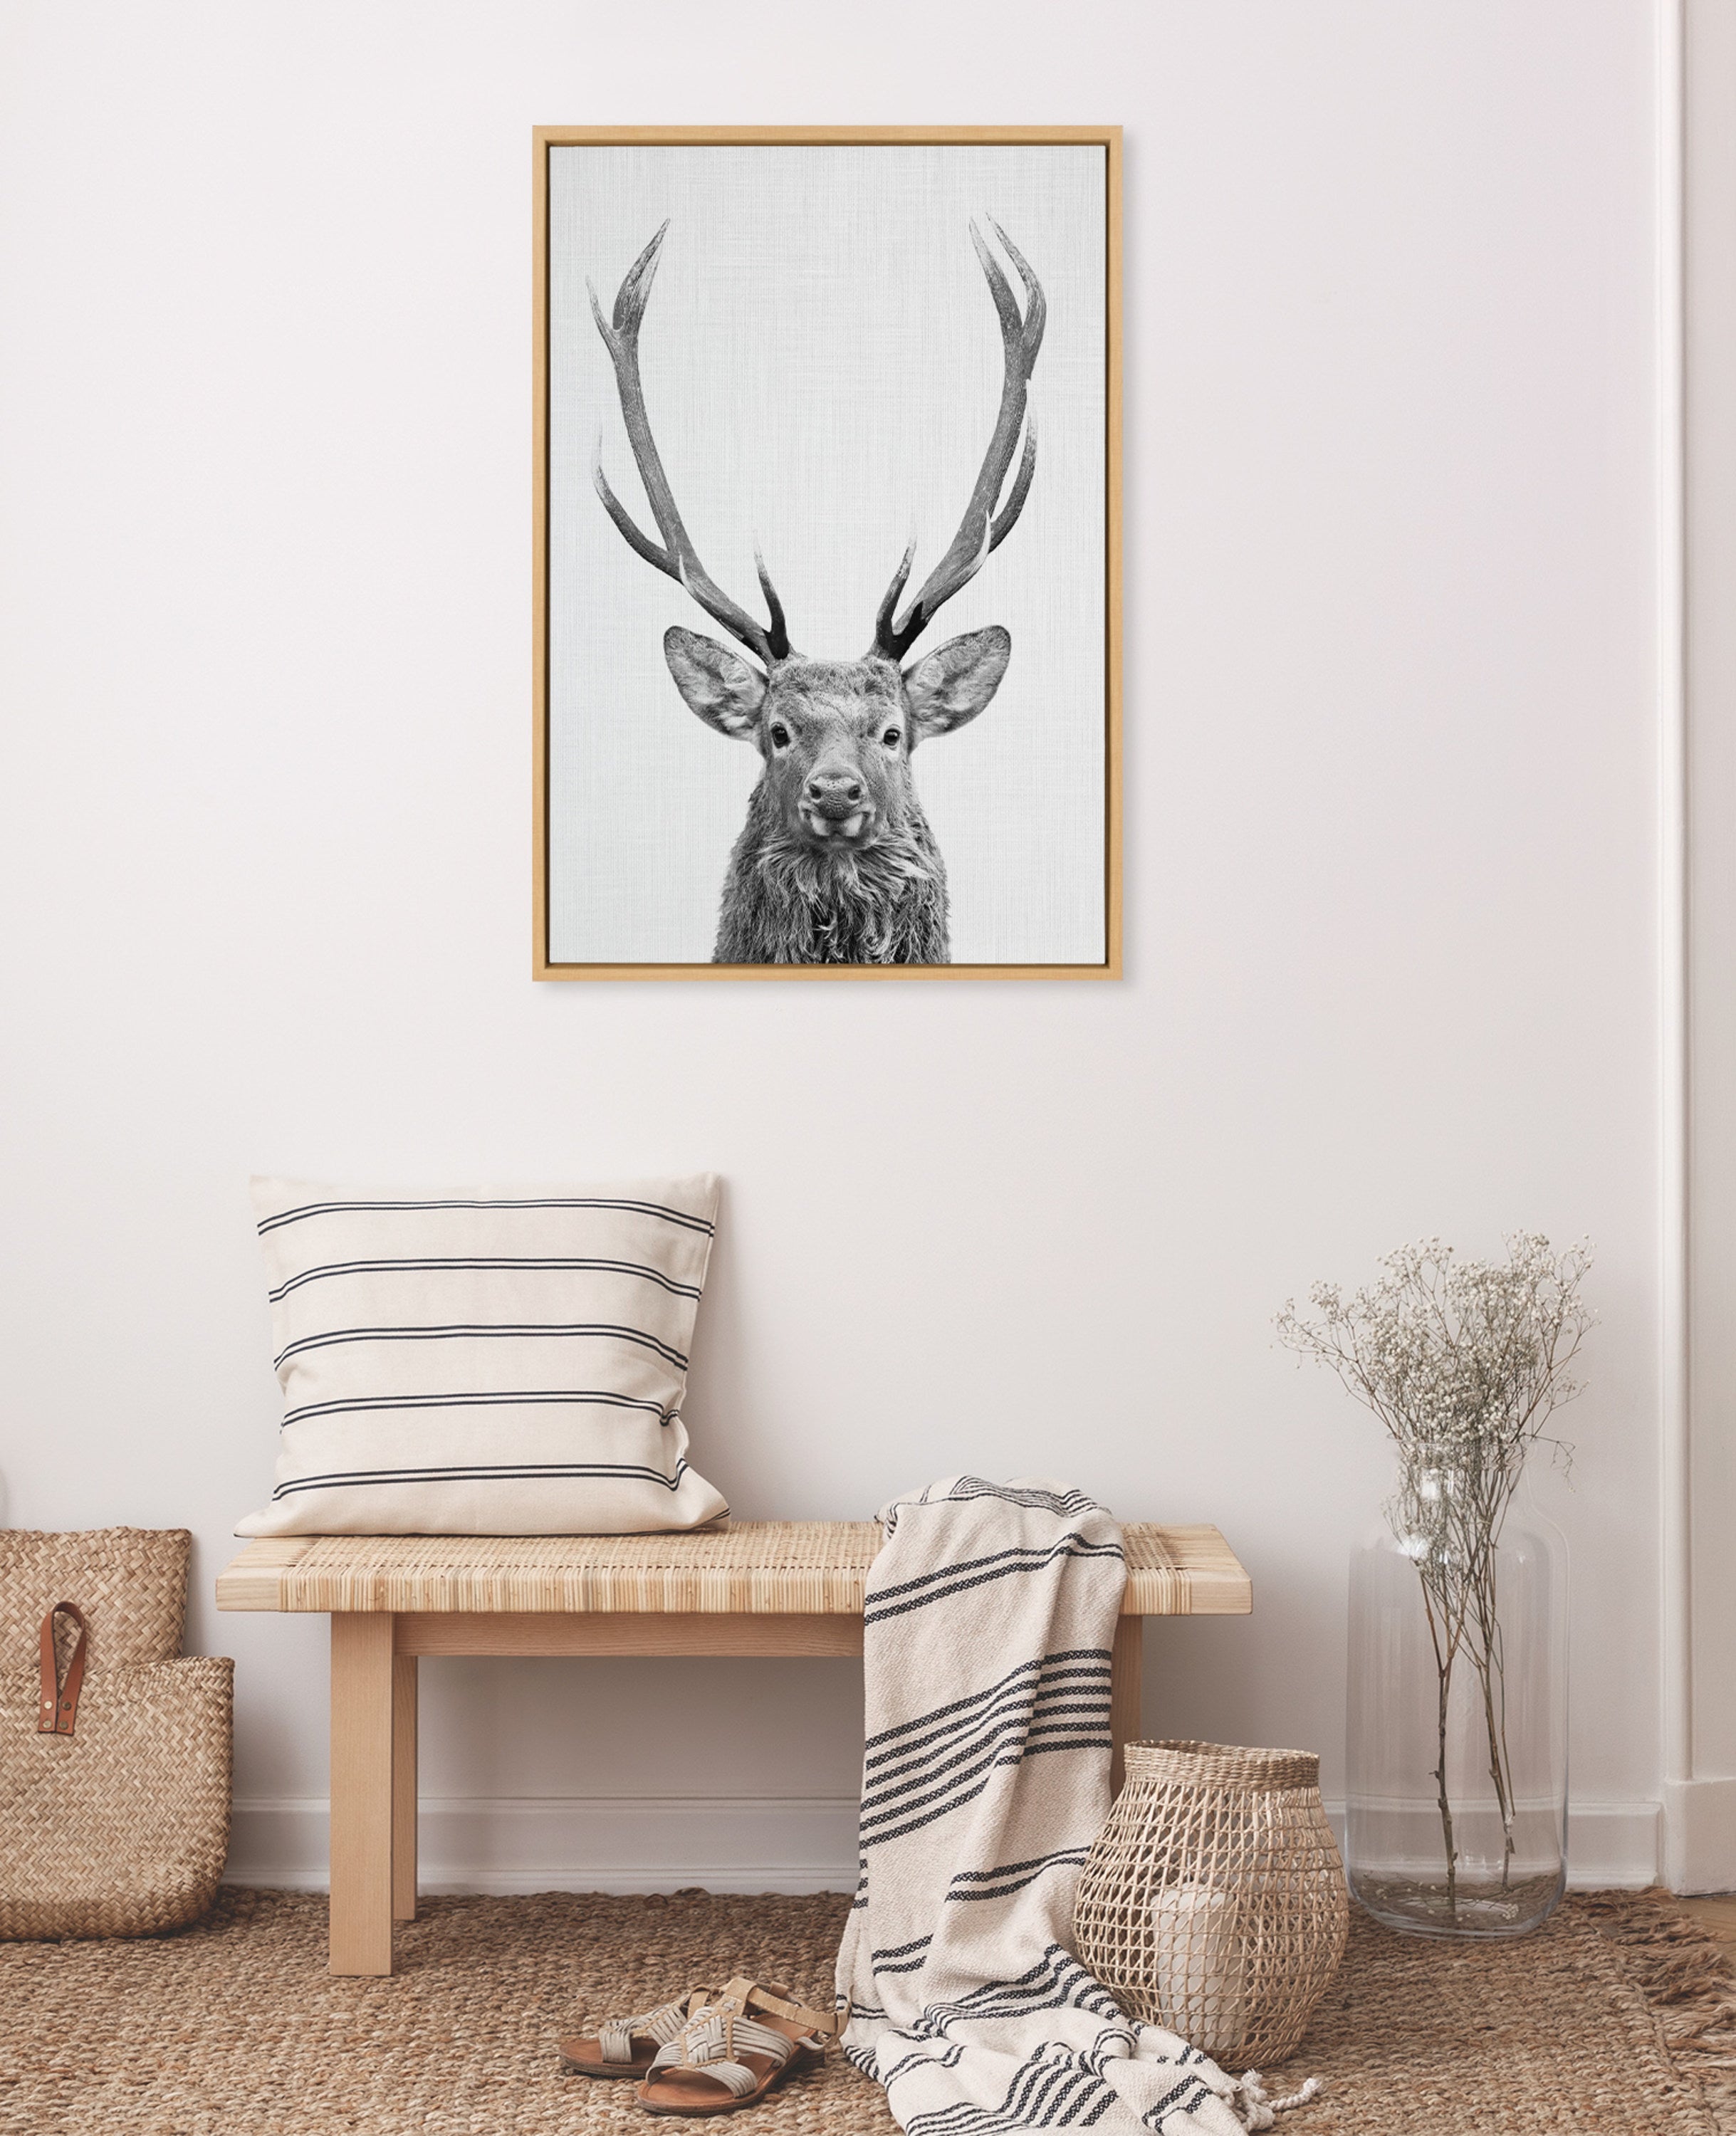 Sylvie The Red Deer BW Framed Canvas by Simon Te of Tai Prints